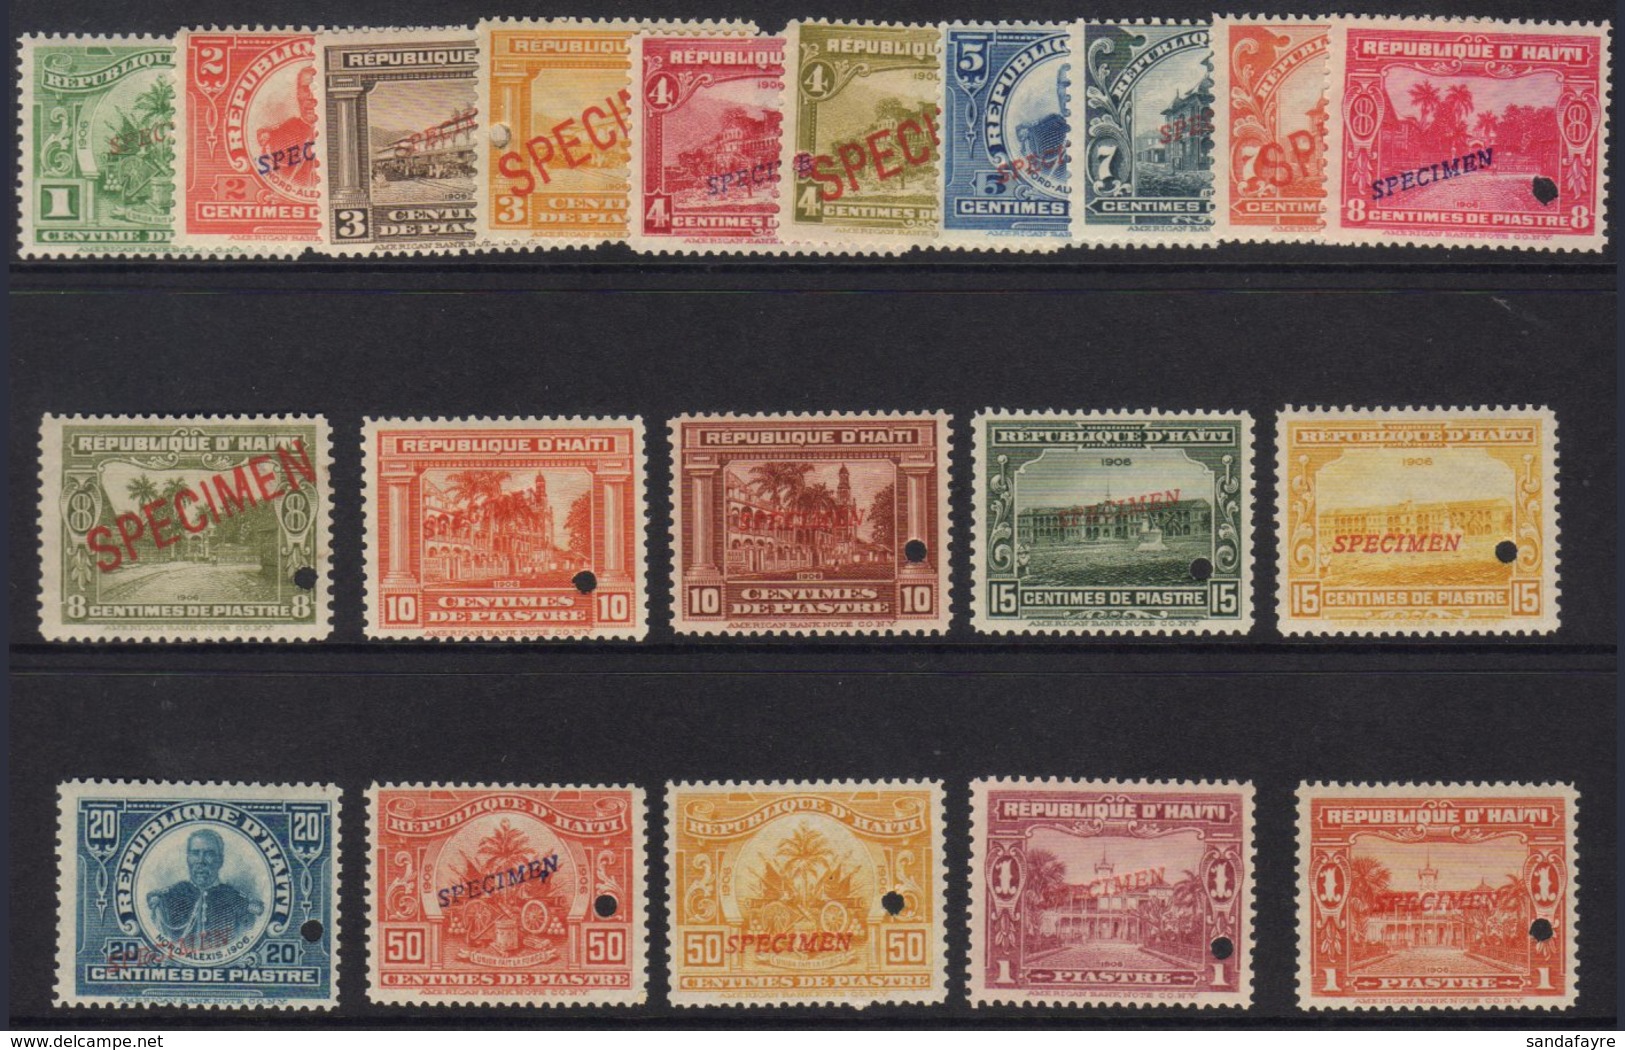 1906-13  Pictorial Complete Set, Scott 125/144, Each With 'SPECIMEN' Overprint And Security Punch Hole, Fresh Never Hing - Haiti